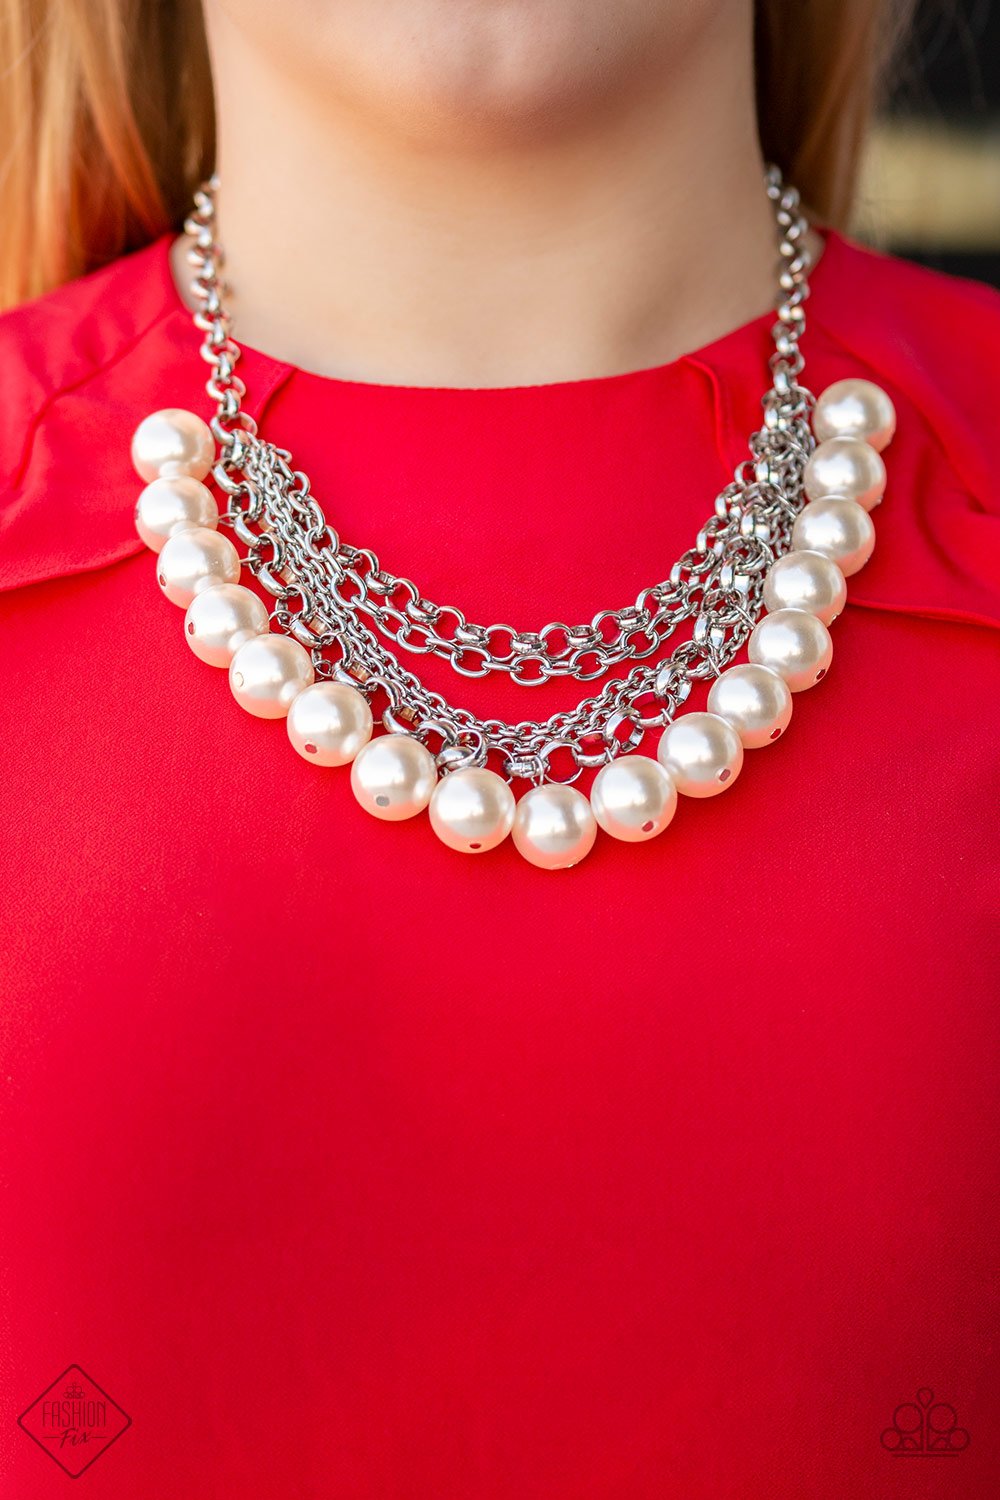 Paparazzi Accessories - One-Way Wall Street - White (Pearls) Necklace